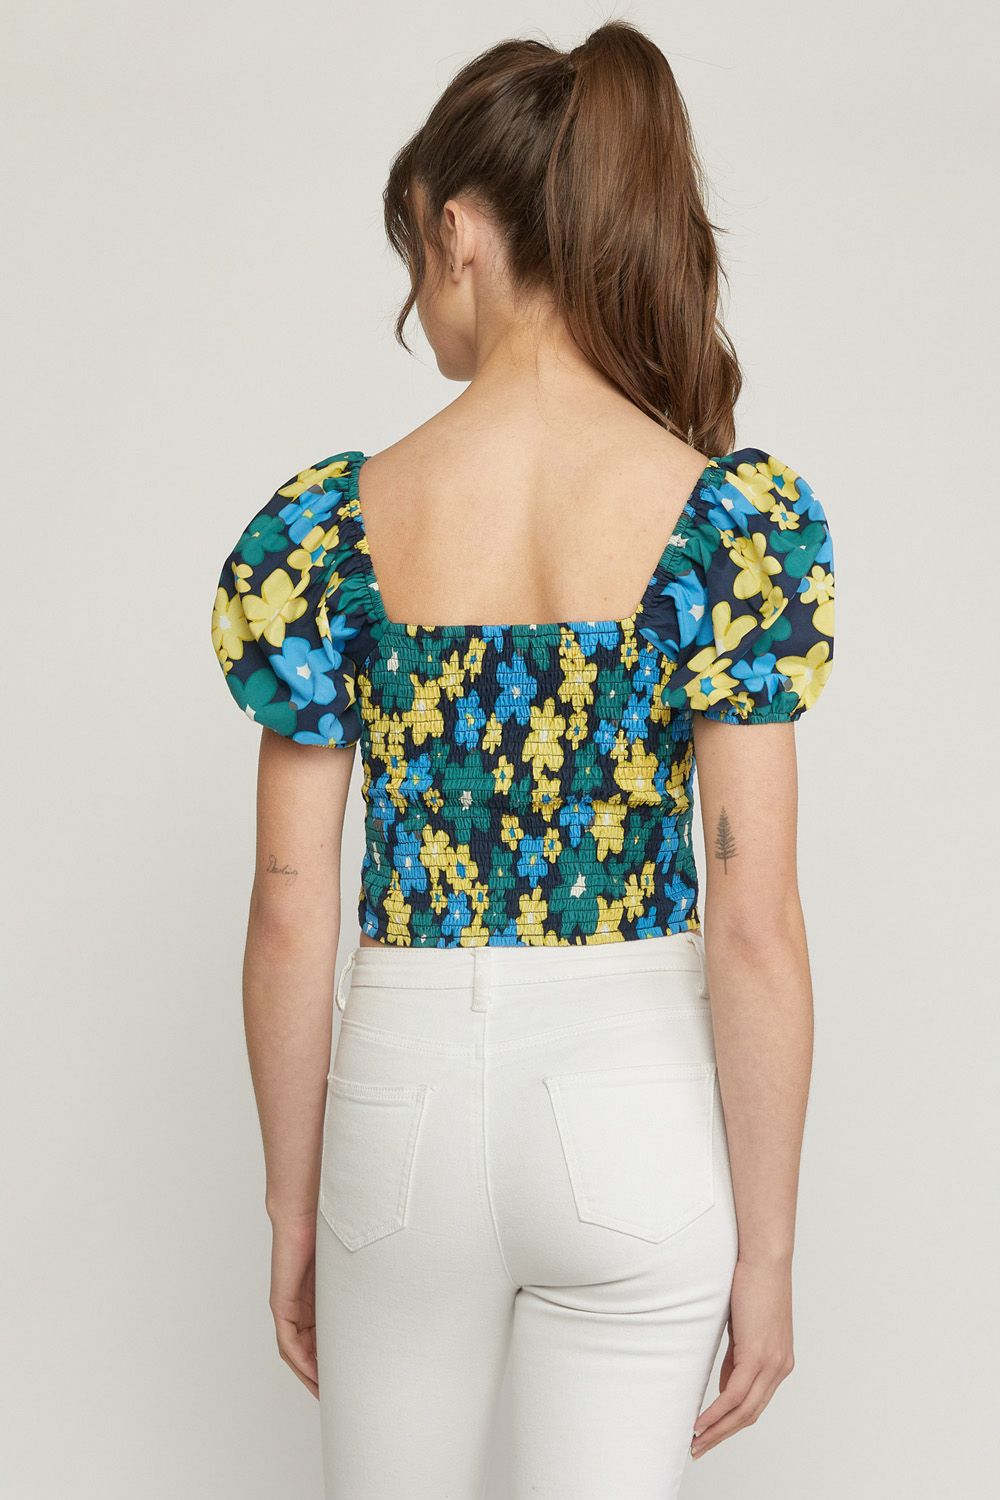 Hartley Floral Ruched Top FINAL SALE